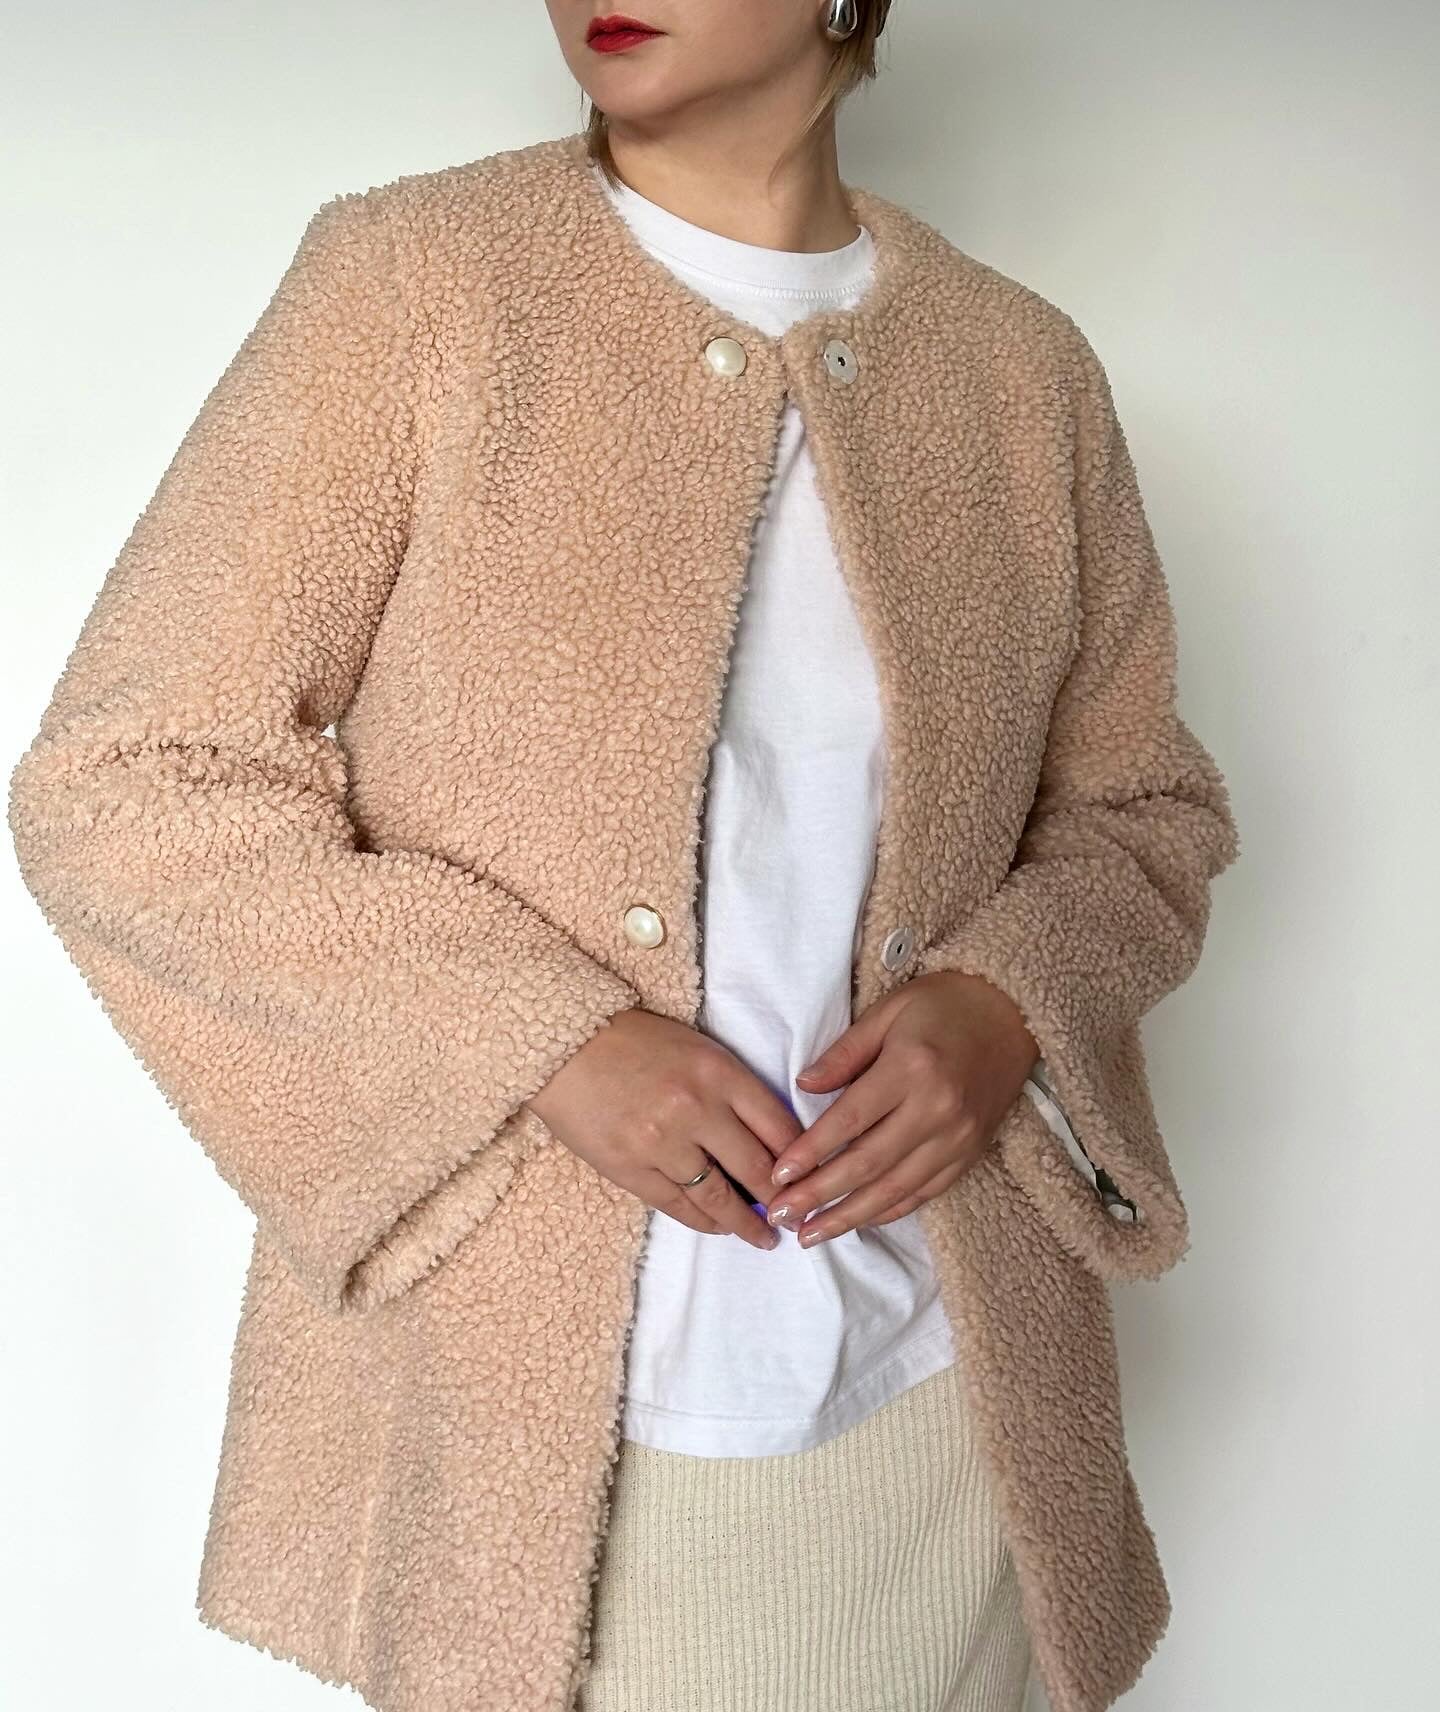 Vintage coat in teddy fabric with beautiful pearl buttons